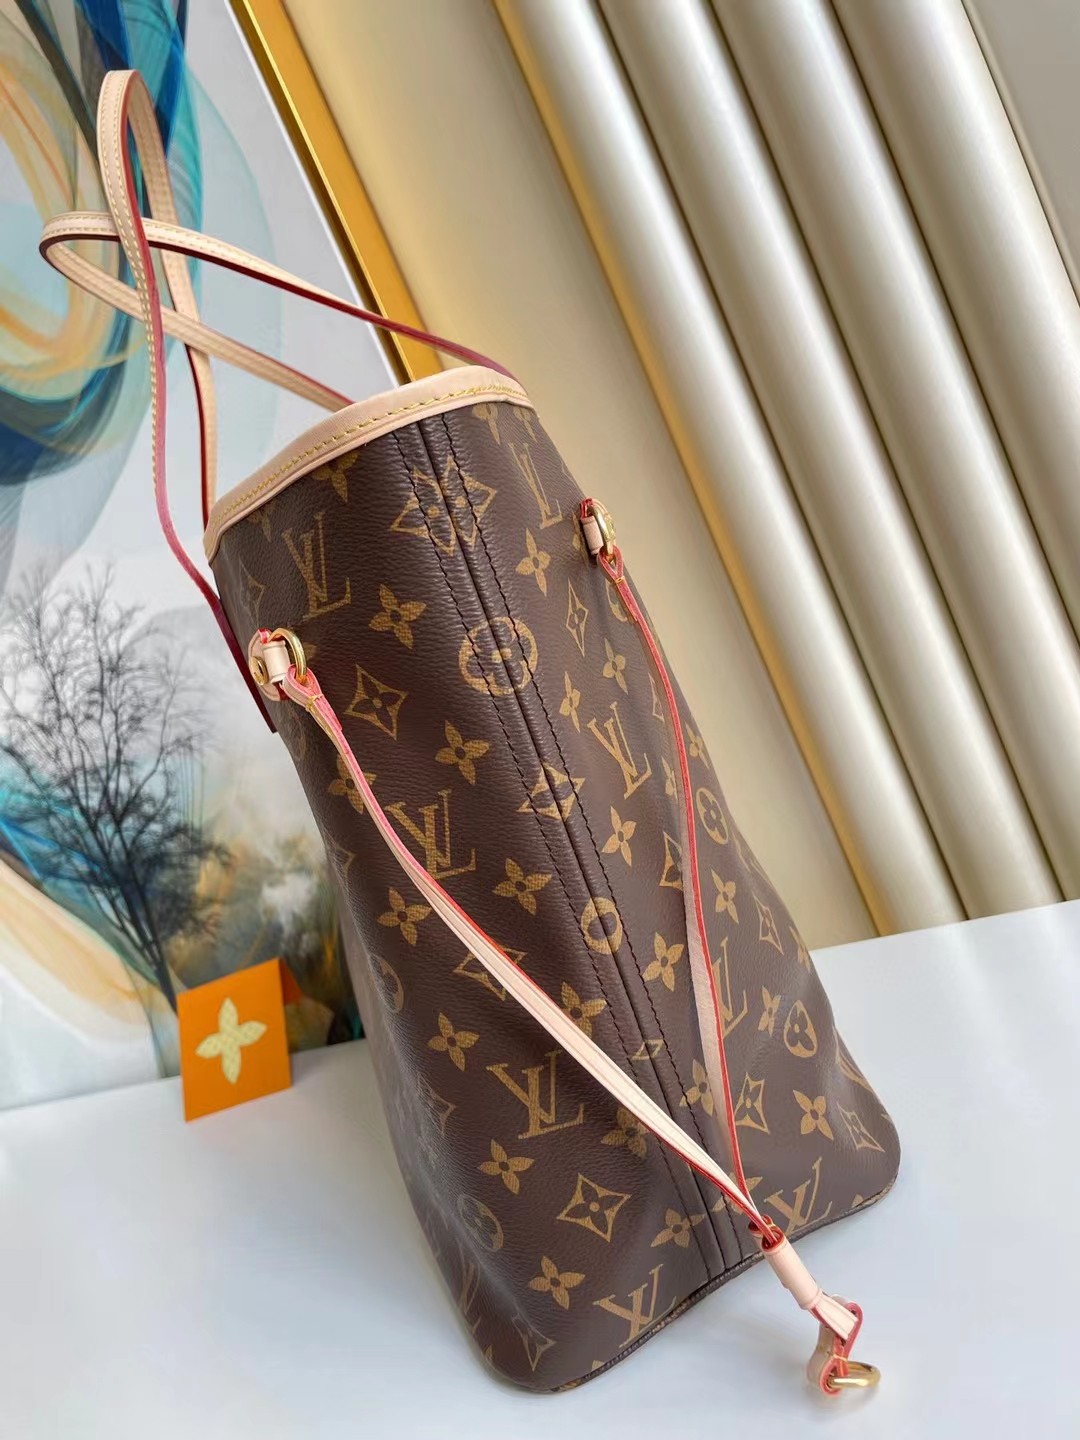 Buy [Used] Louis Vuitton Monogram Neverfull MM Tote Bag Tote Bag M41177  Brown PVC Bag M41177 from Japan - Buy authentic Plus exclusive items from  Japan